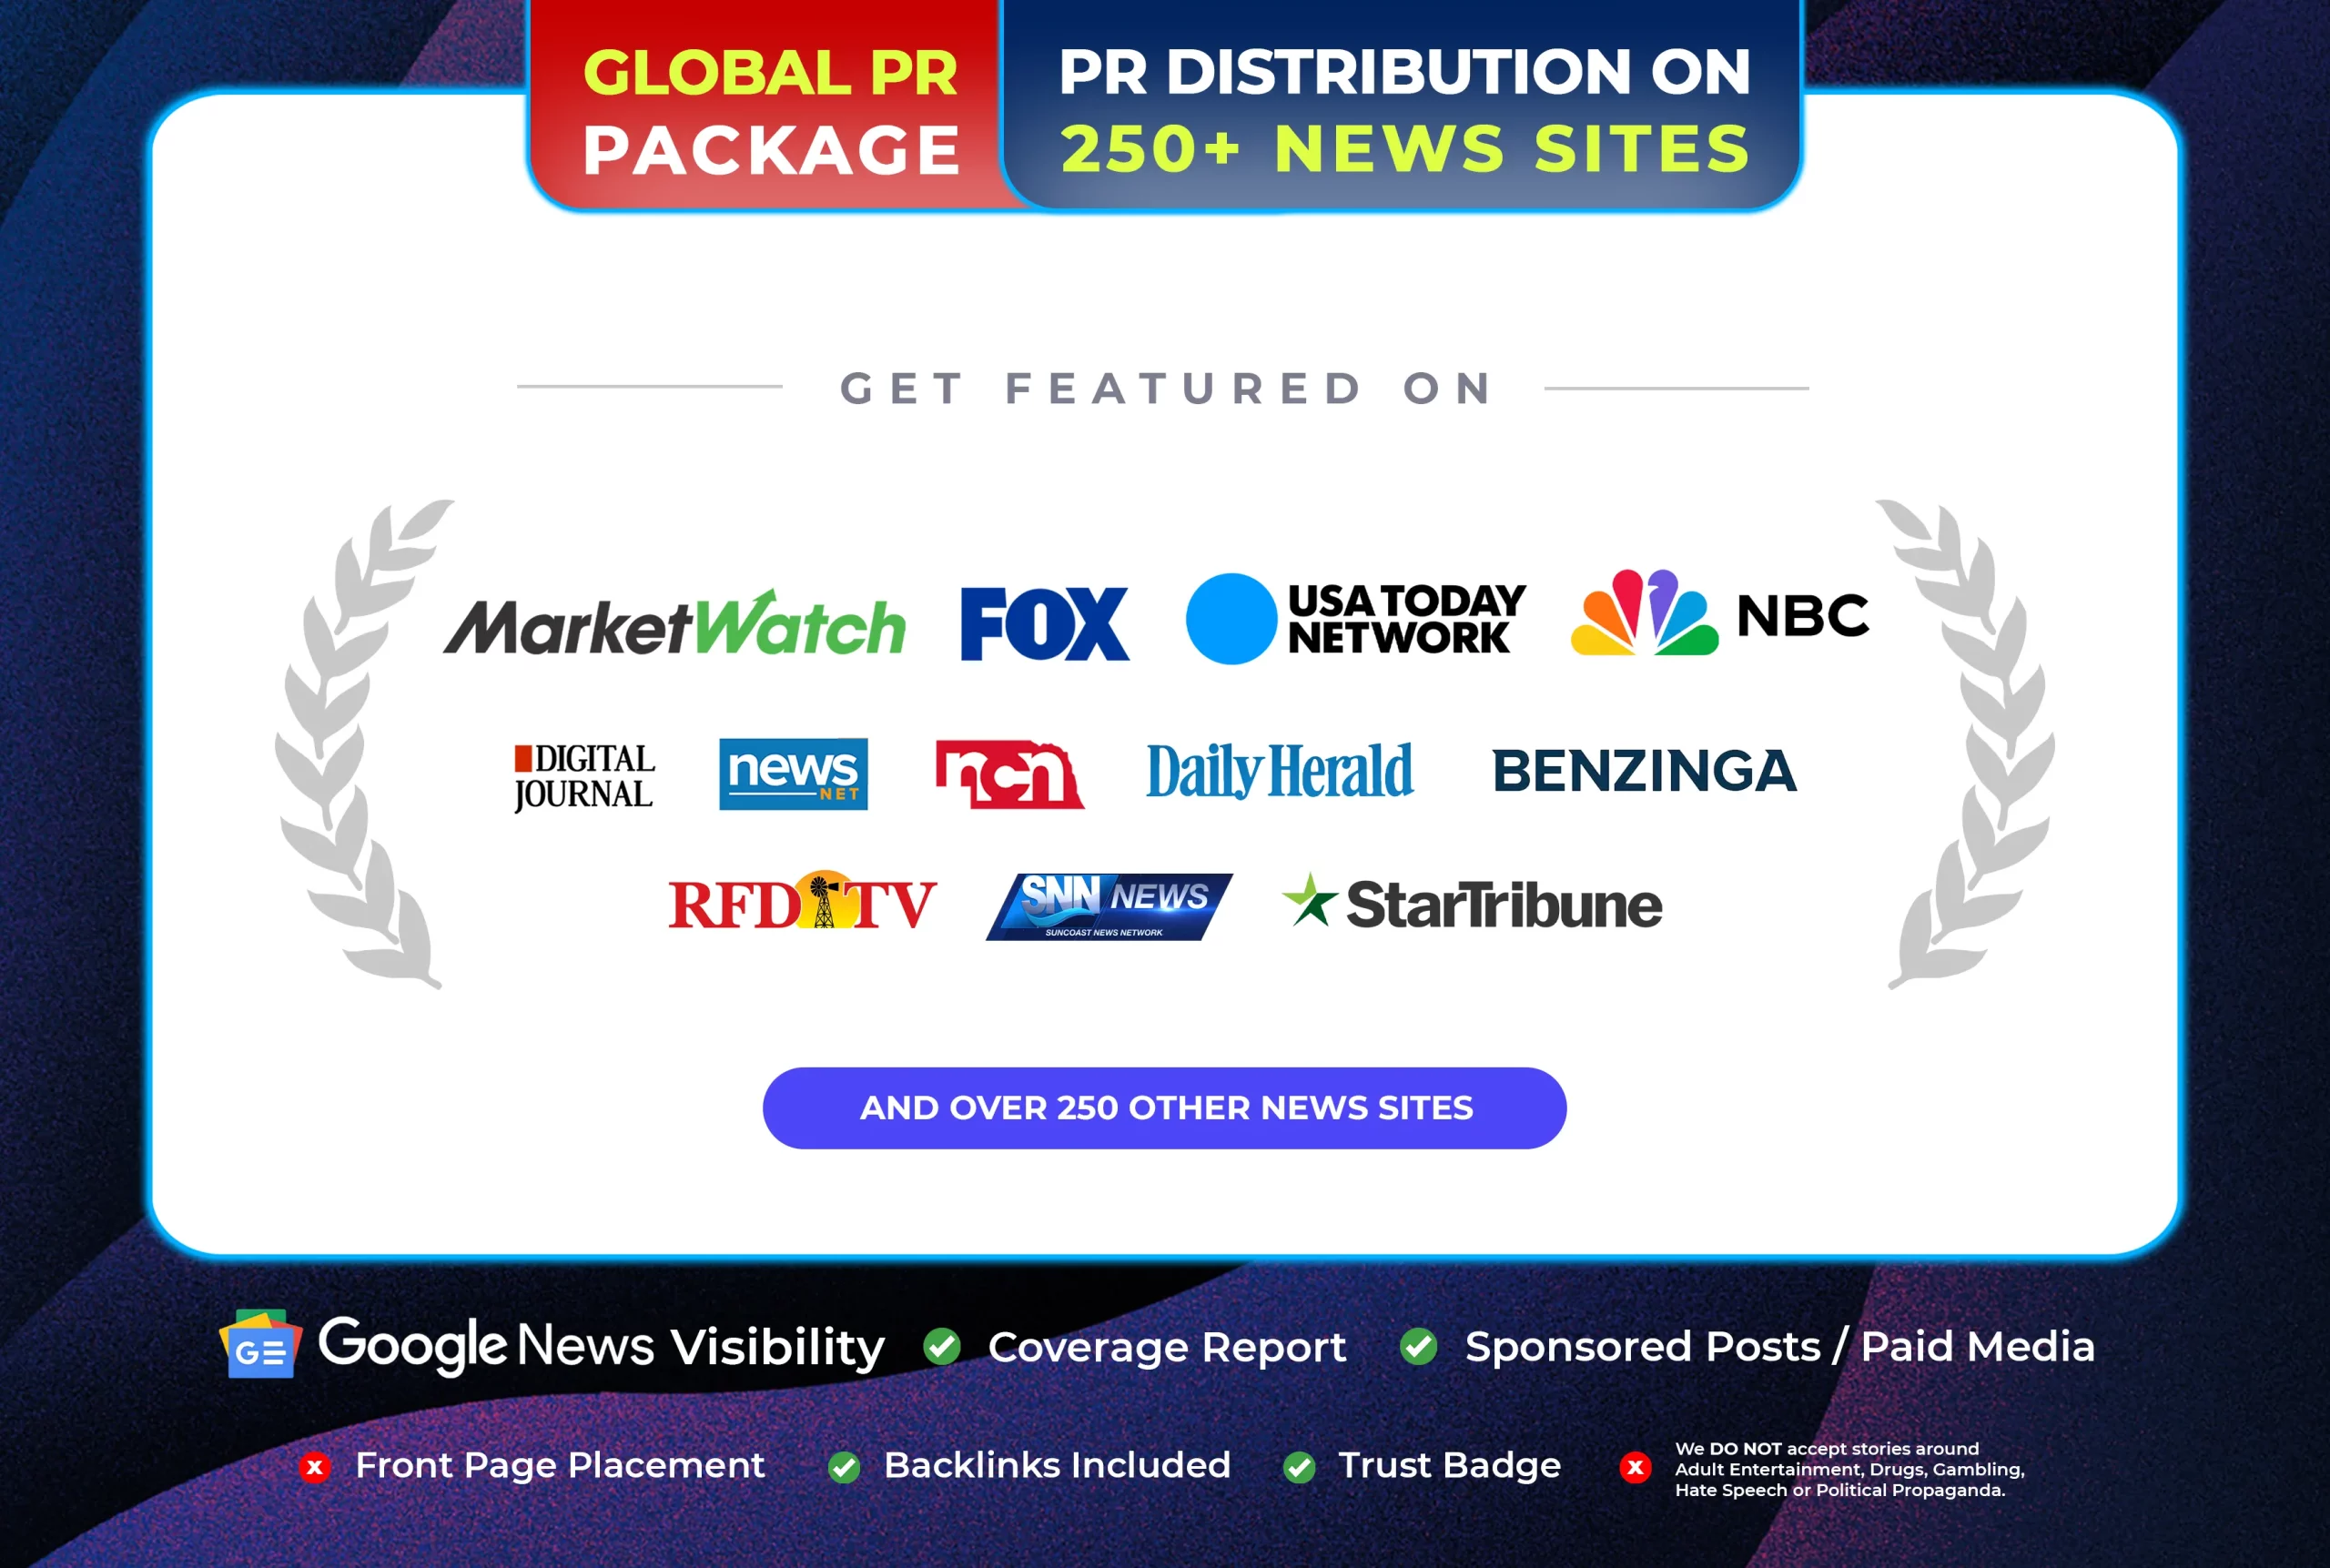 Global PR (Get Featured on Market Watch, Fox, USA Today Network & 250+ Other News Sites)